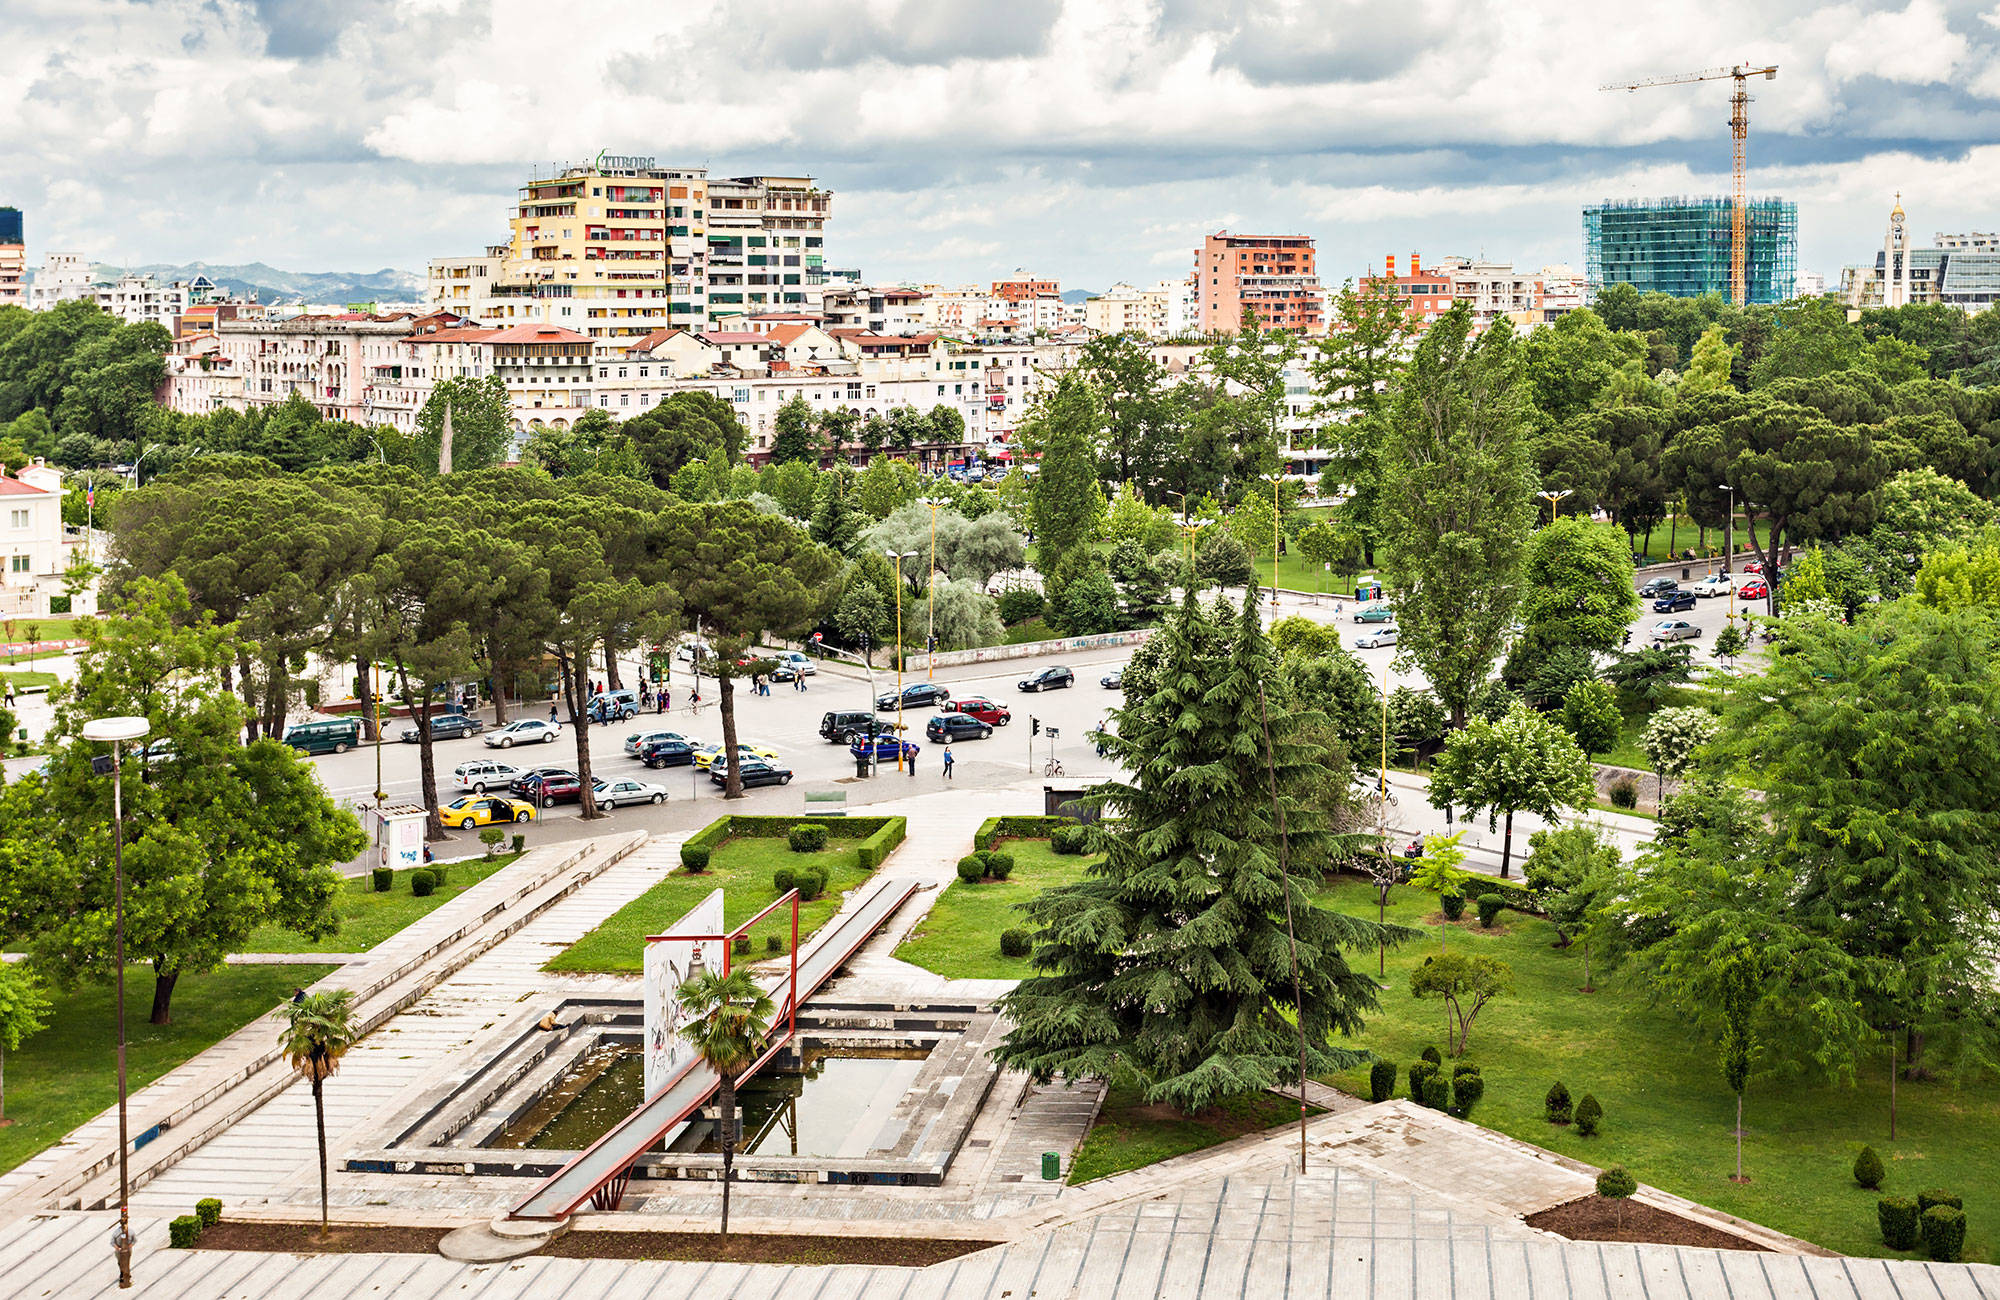 You'll end your trip in the capital of Albania, Tirana